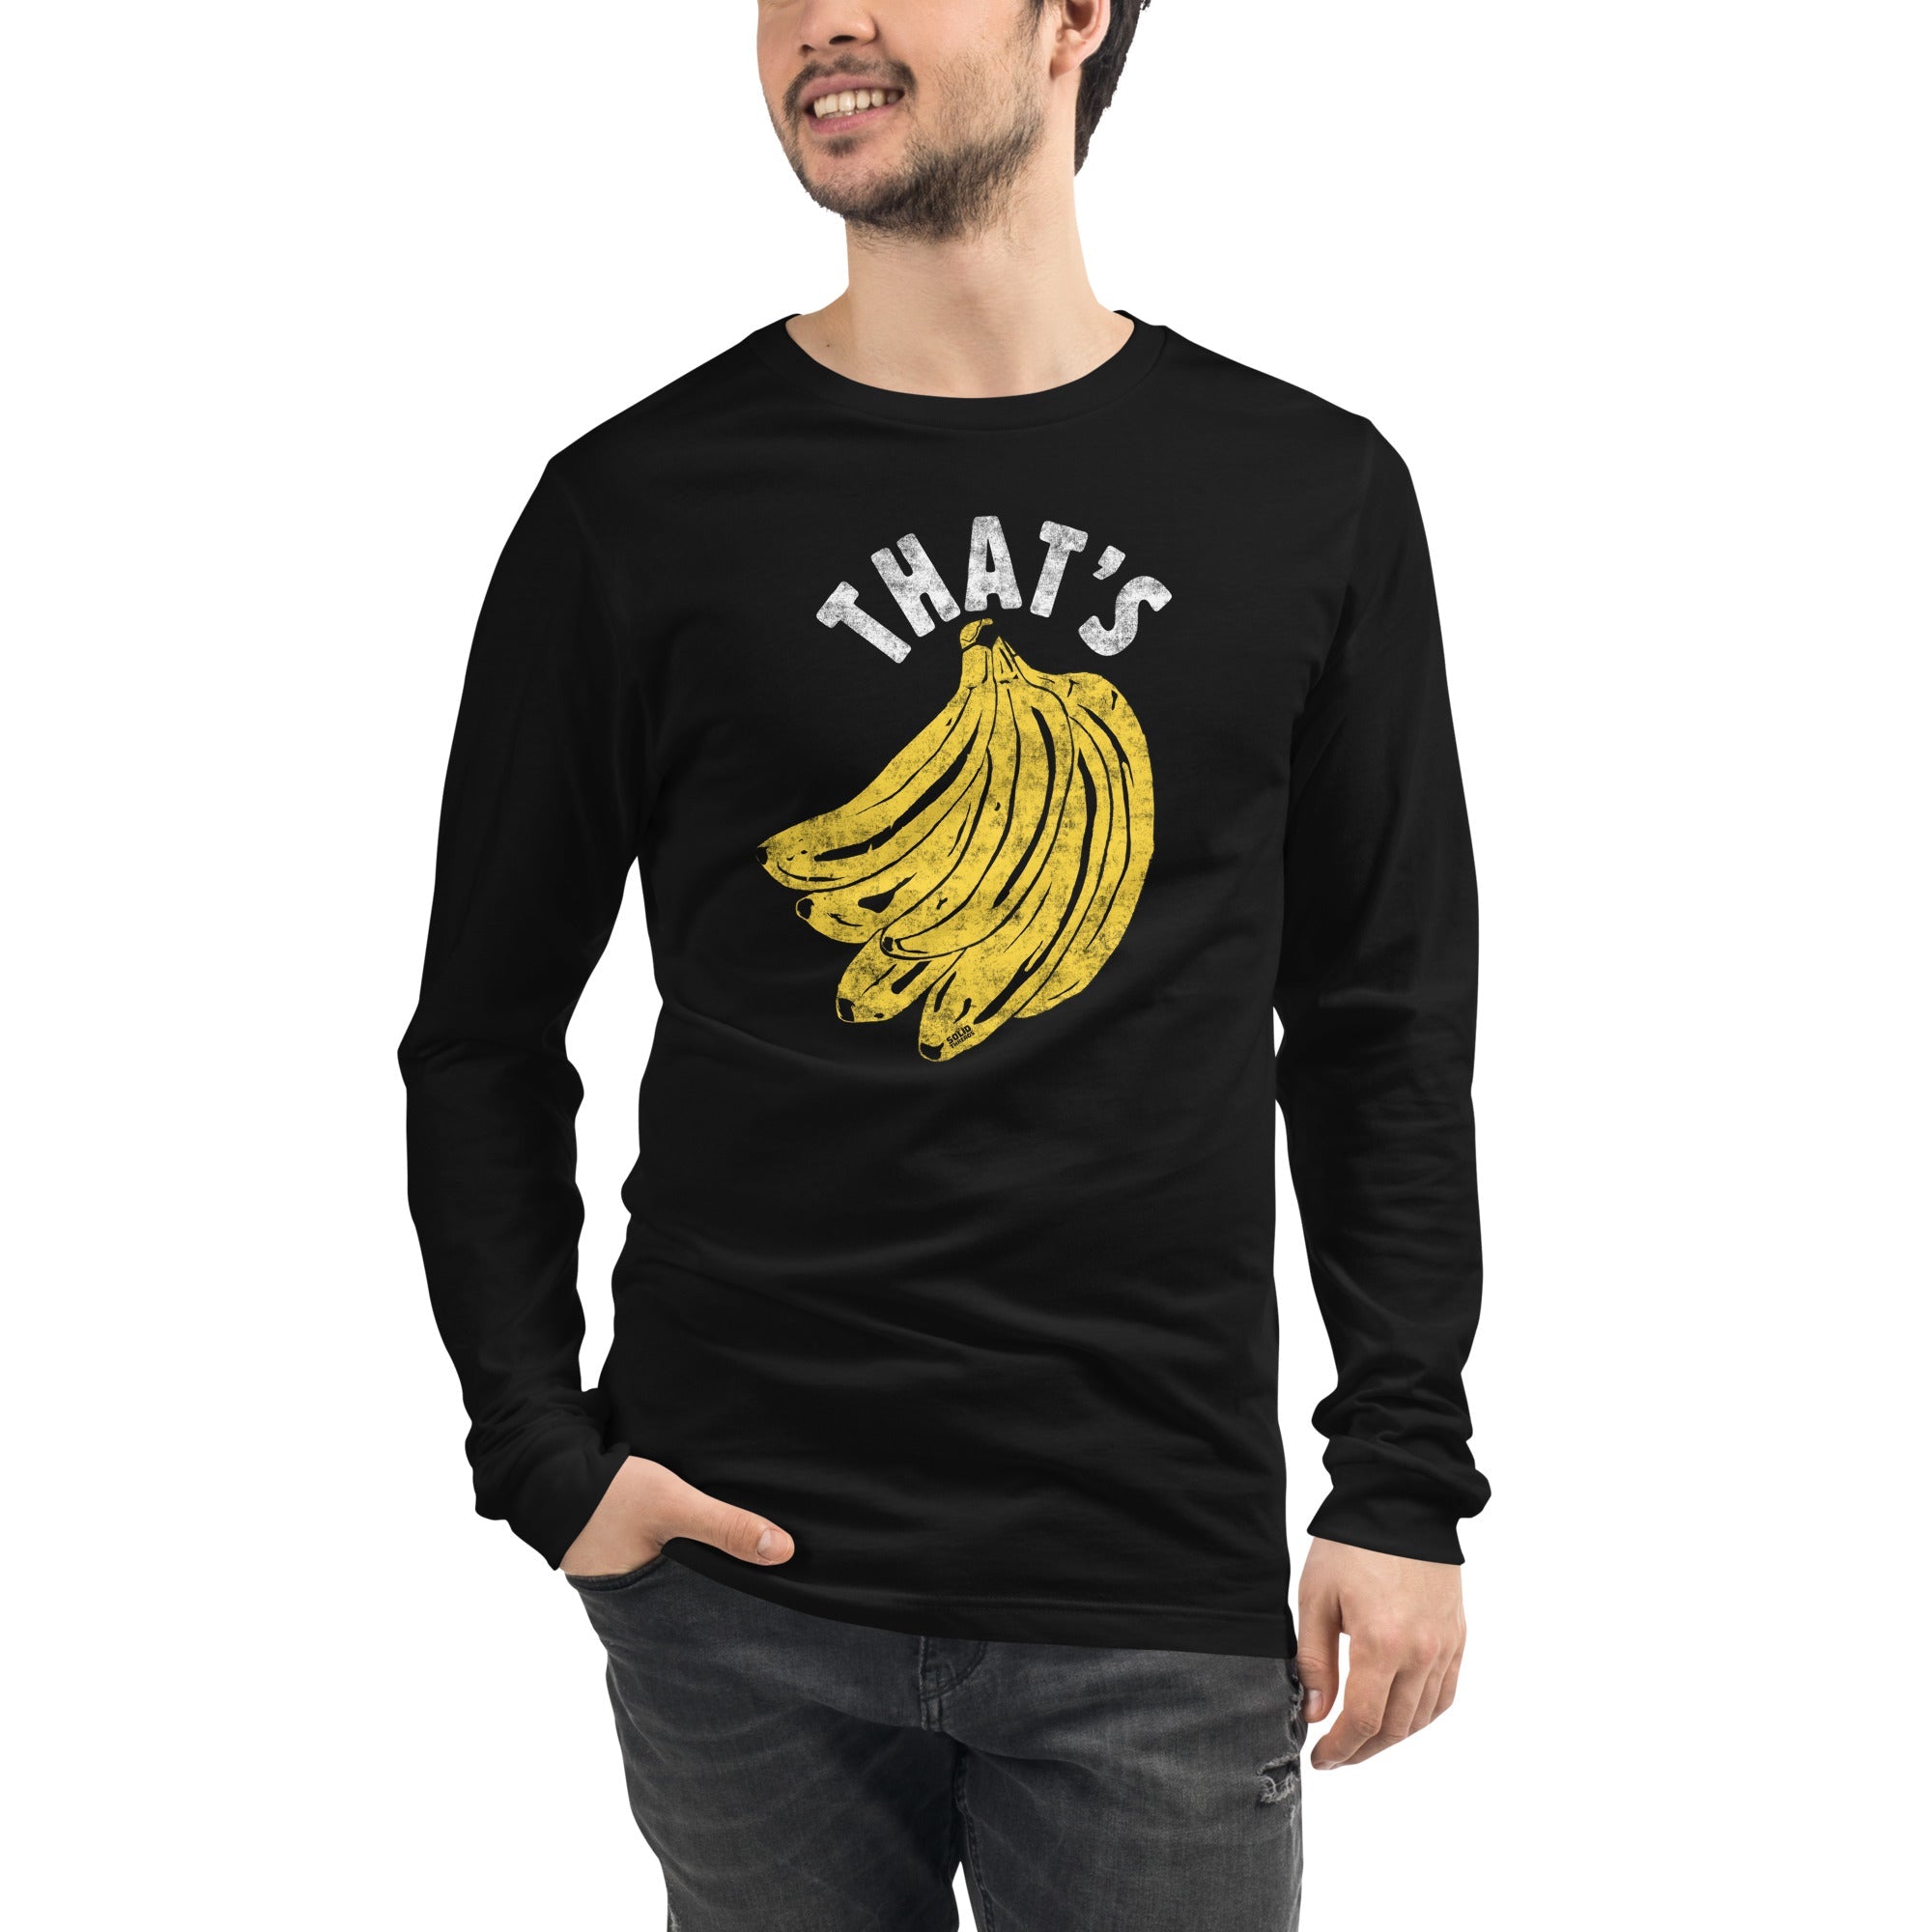 That's Bananas Vintage Graphic Long Sleeve Tee | Funny Fruit T-Shirt | Solid Threads